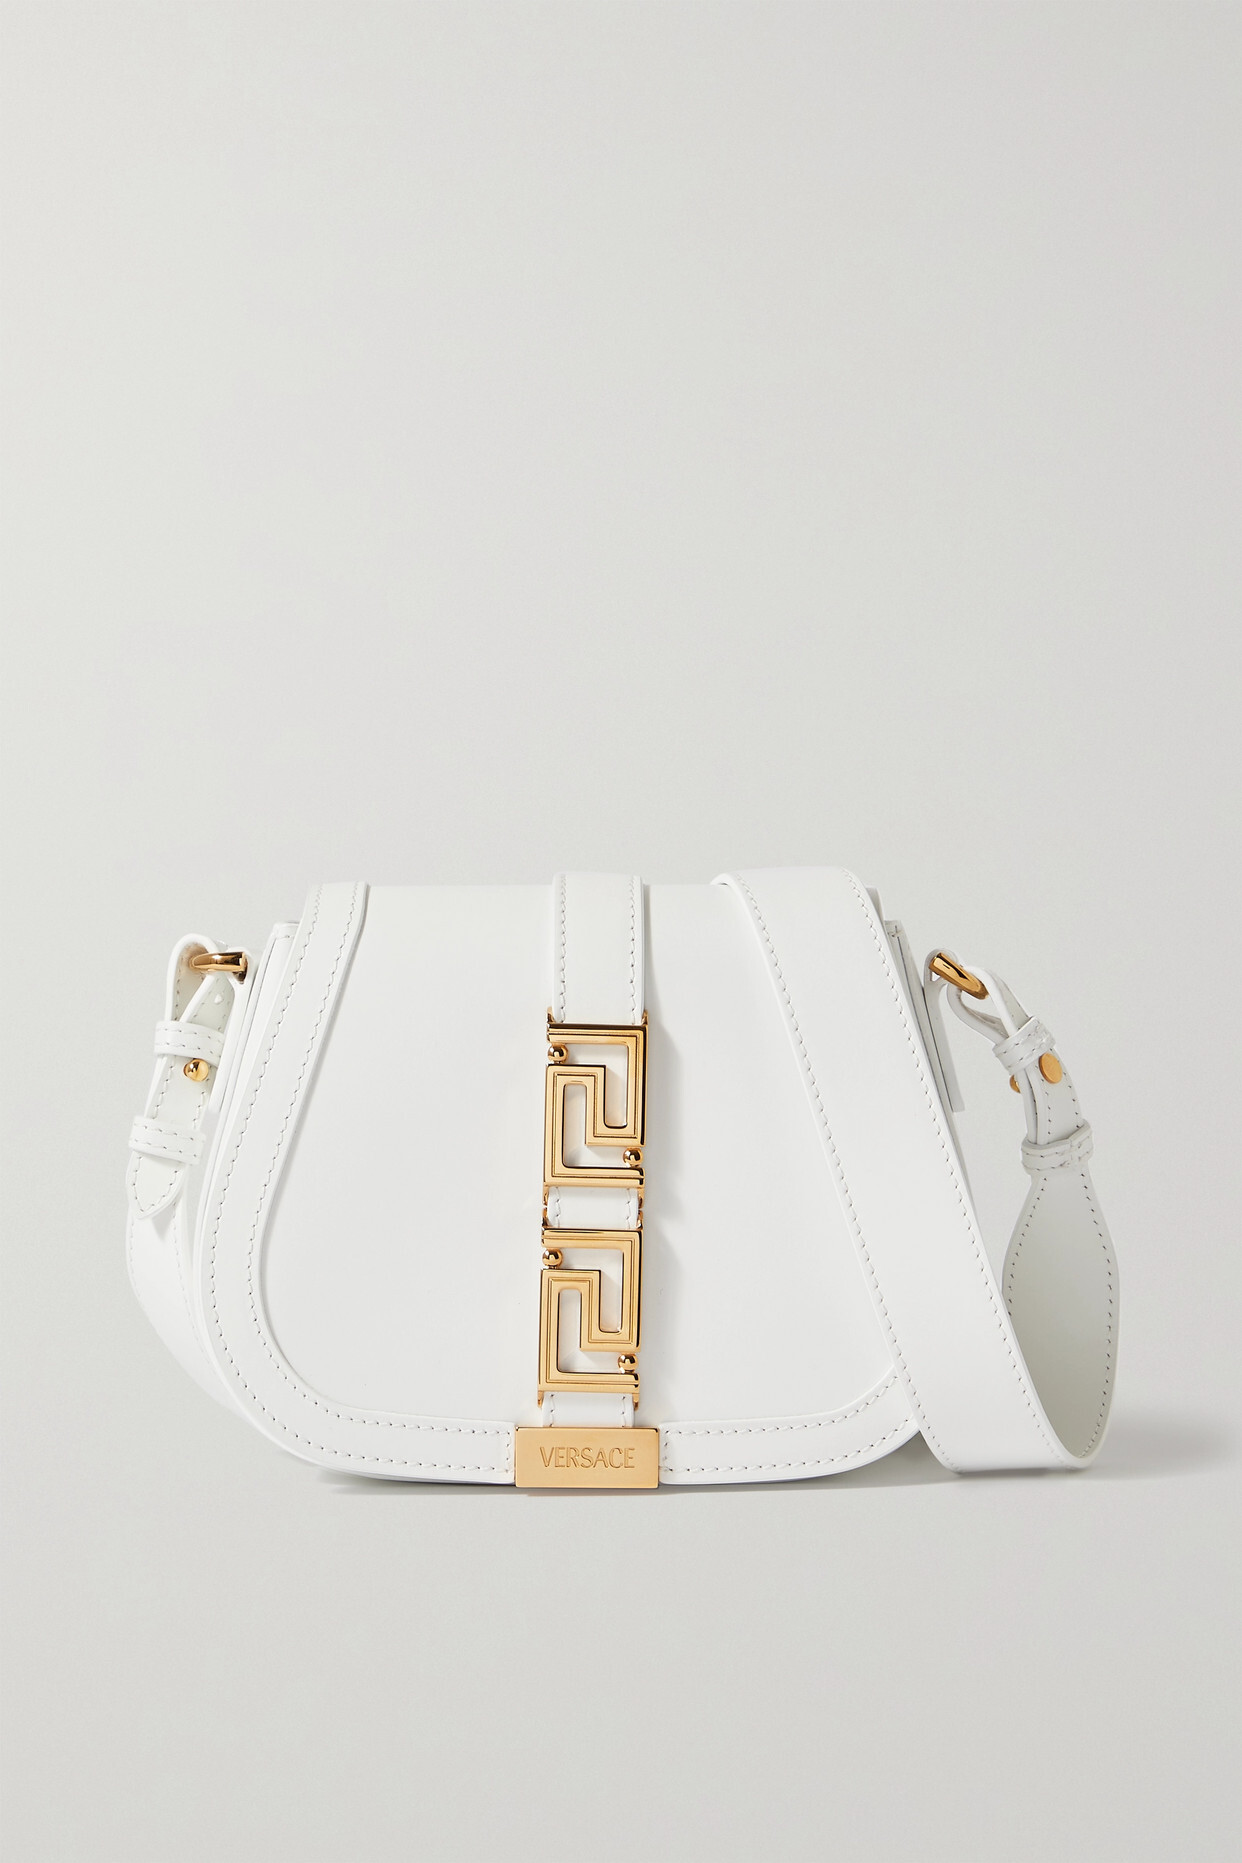 Versace - Small Leather Shoulder Bag - White